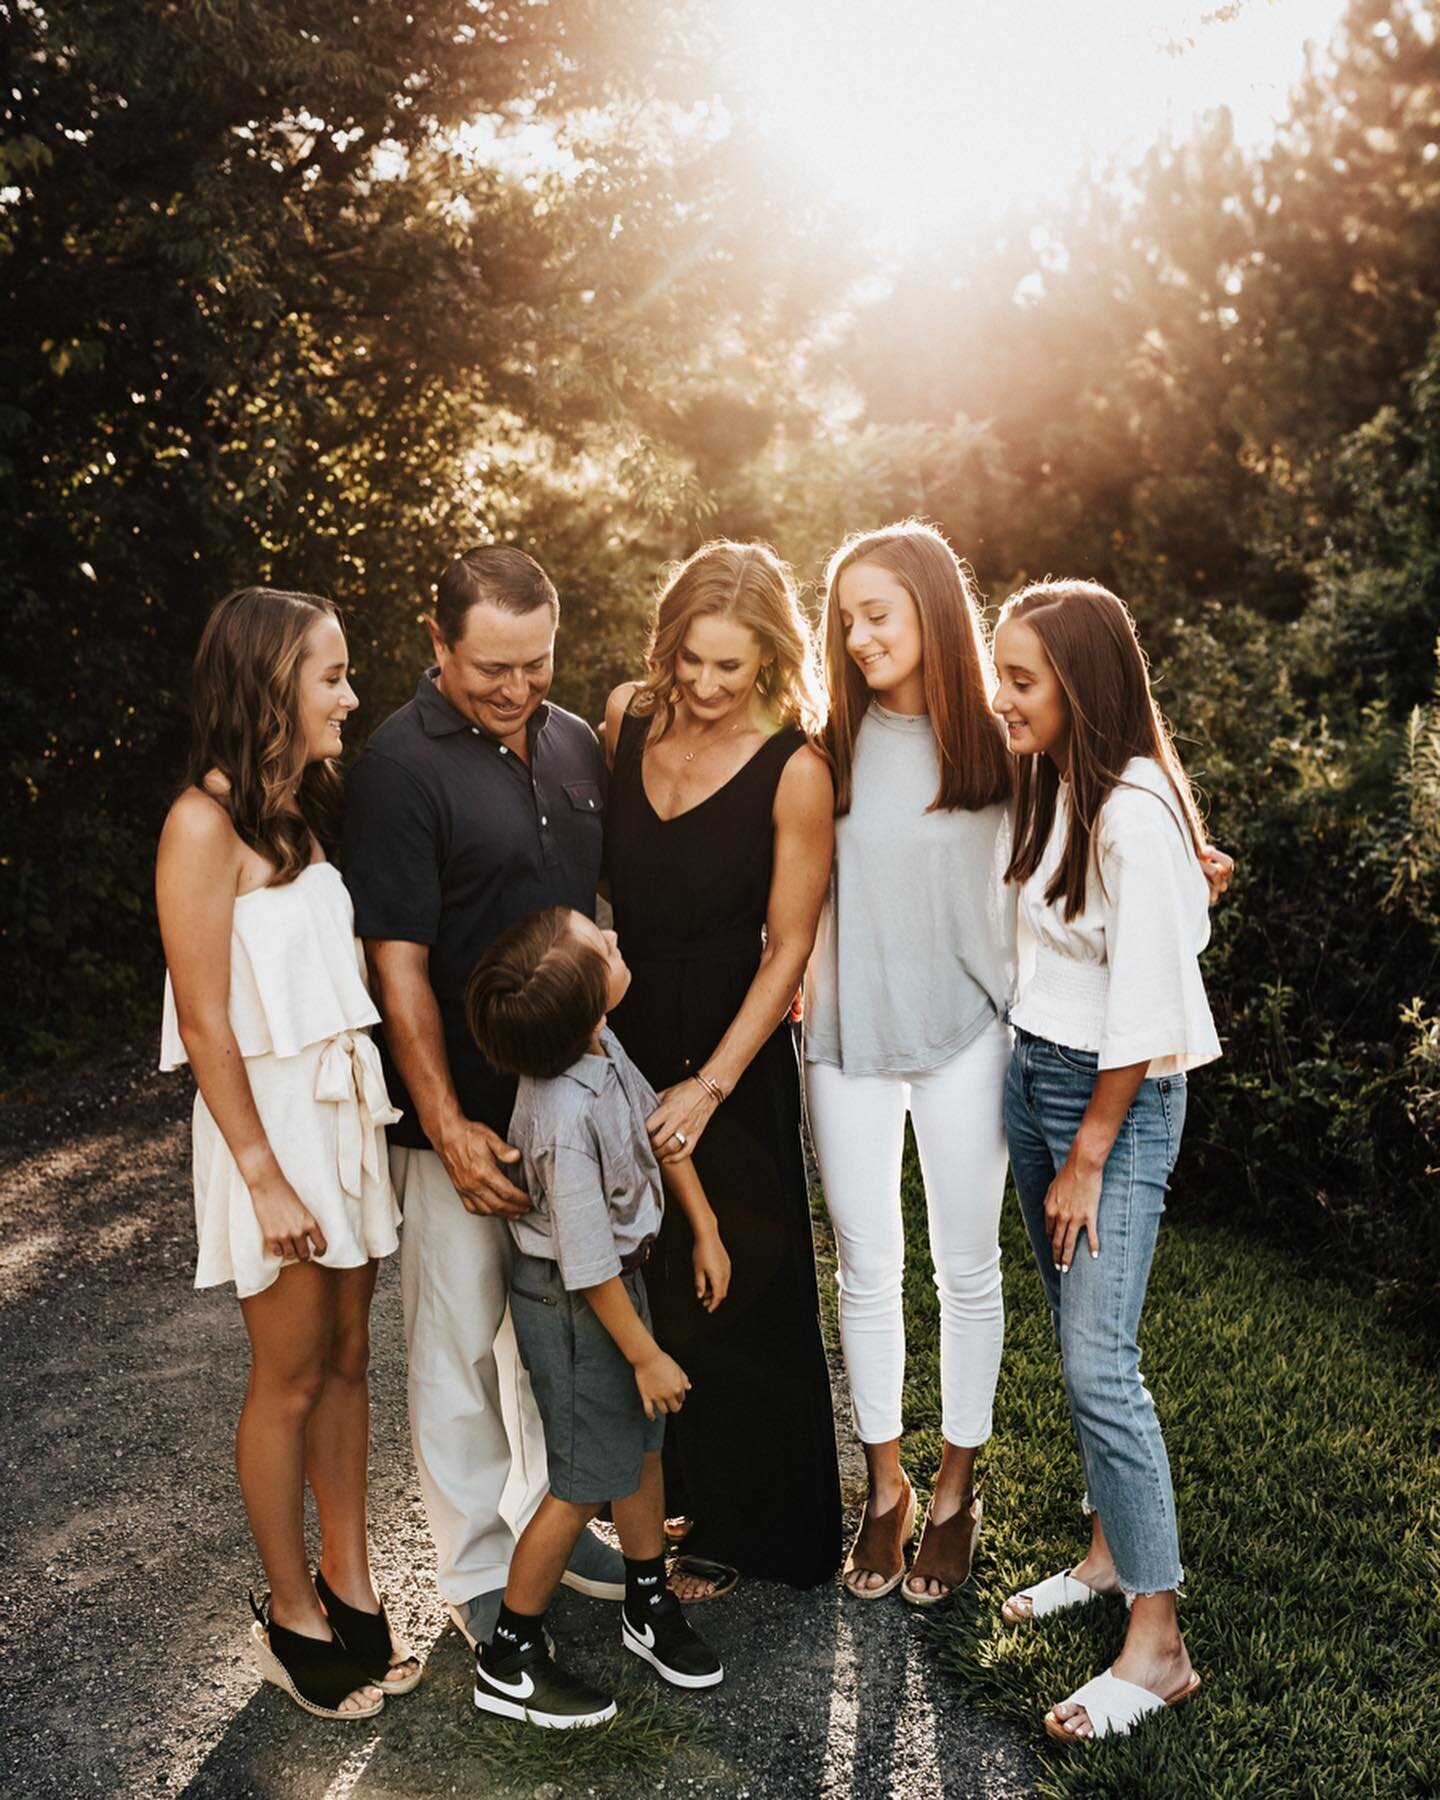 Sunday night&rsquo;s summer glow ✨when a triplet senior session, turns into beautiful family photos! I love incorporating the whole family in senior photos. 👍🏻gorgeous fam!